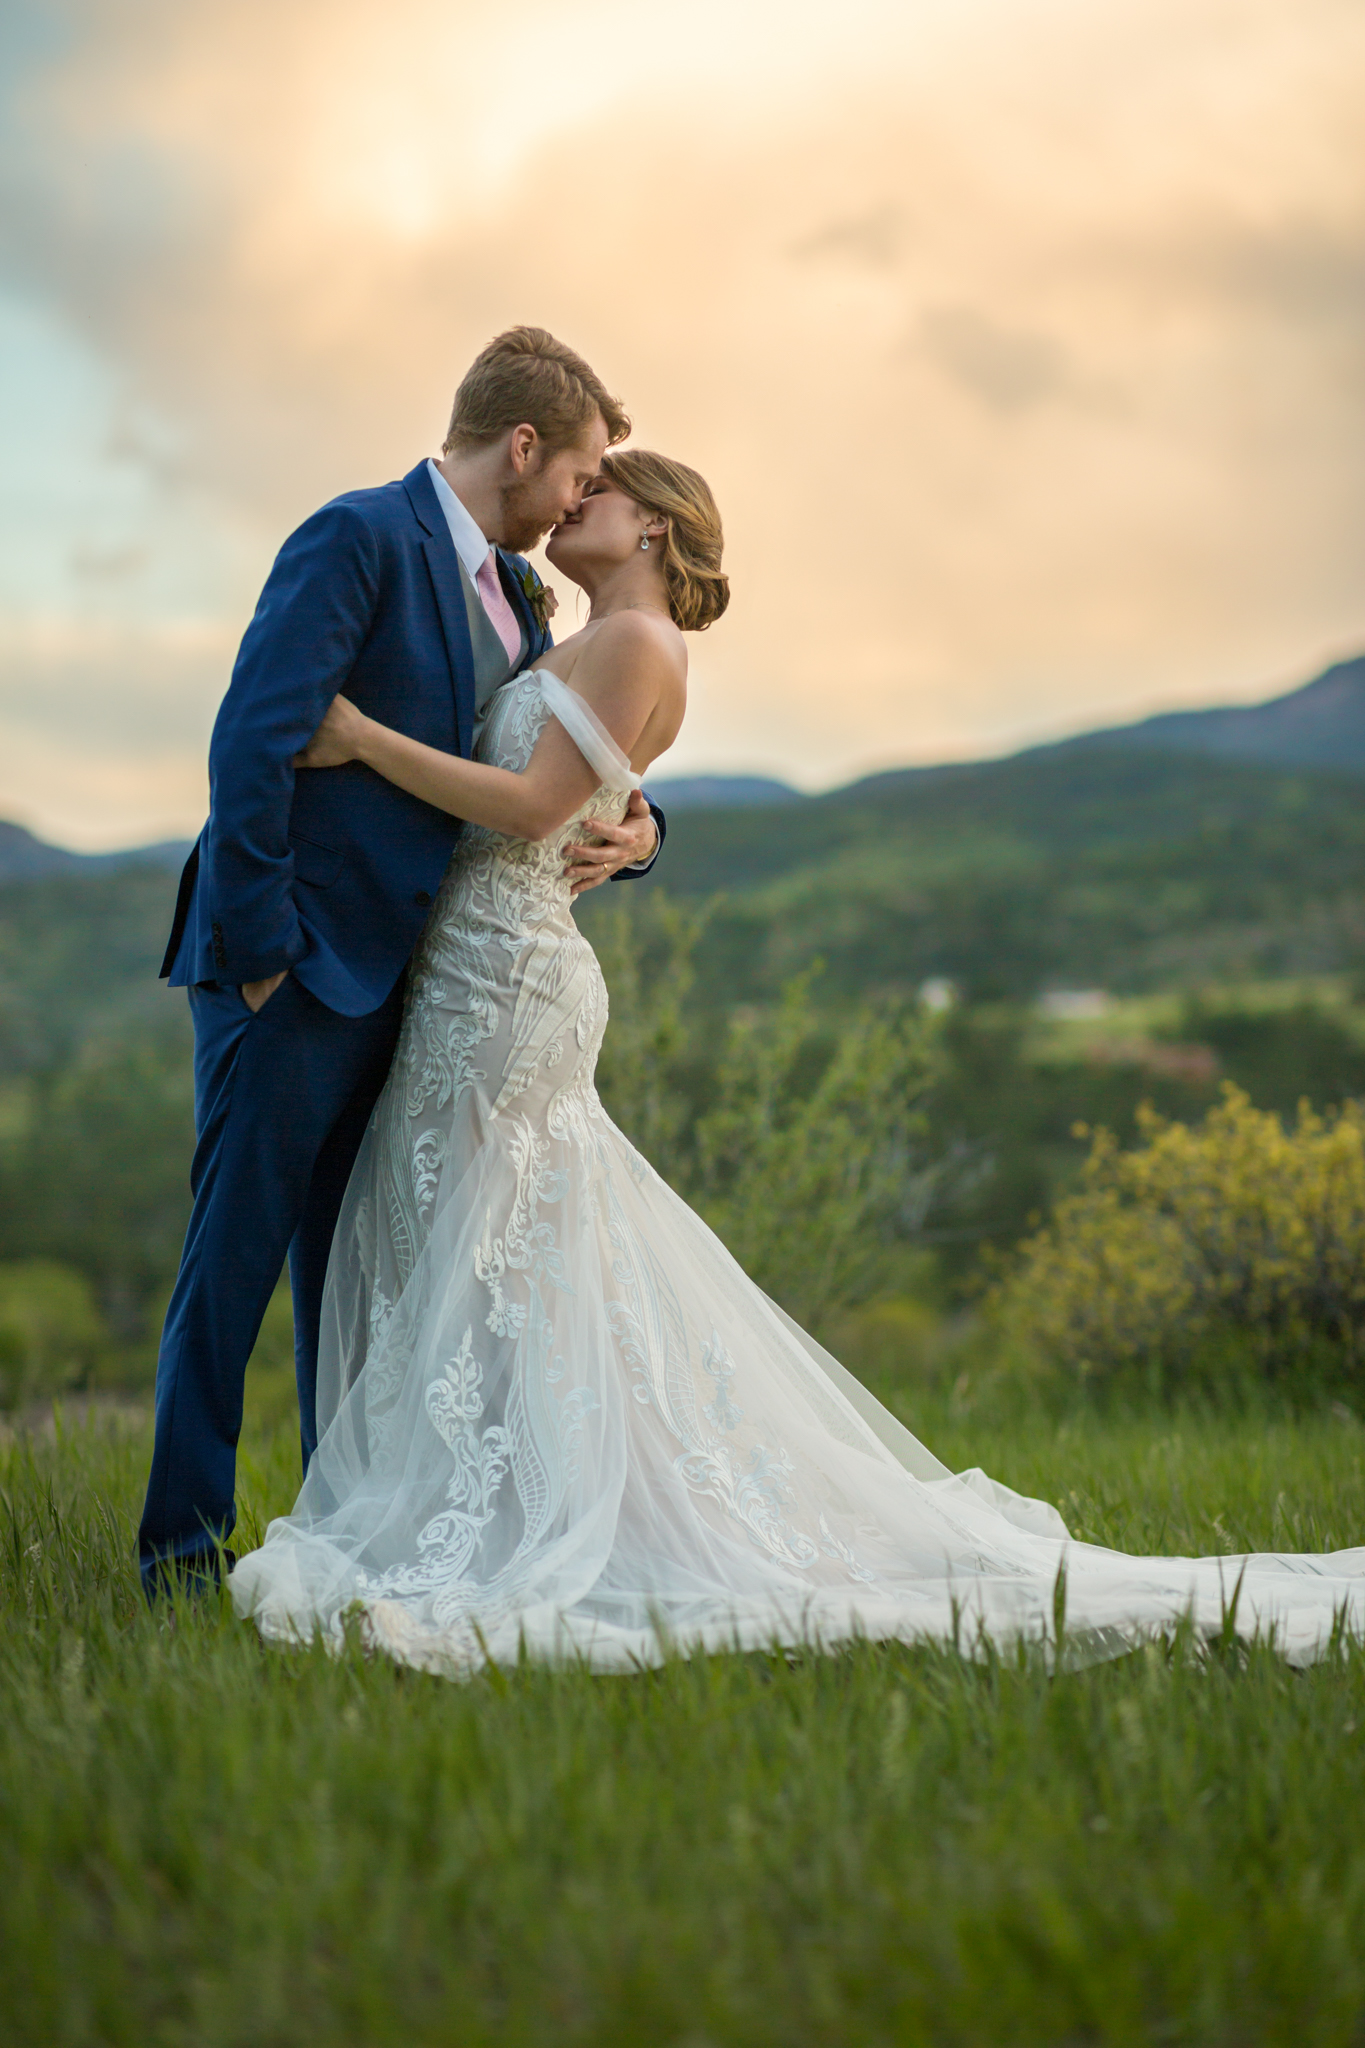 stunning timeless bride and groom portrait at stone mountain lodge cabins wedding venue in lyons colorado captured by colorado mountain wedding photographer kathryn kim